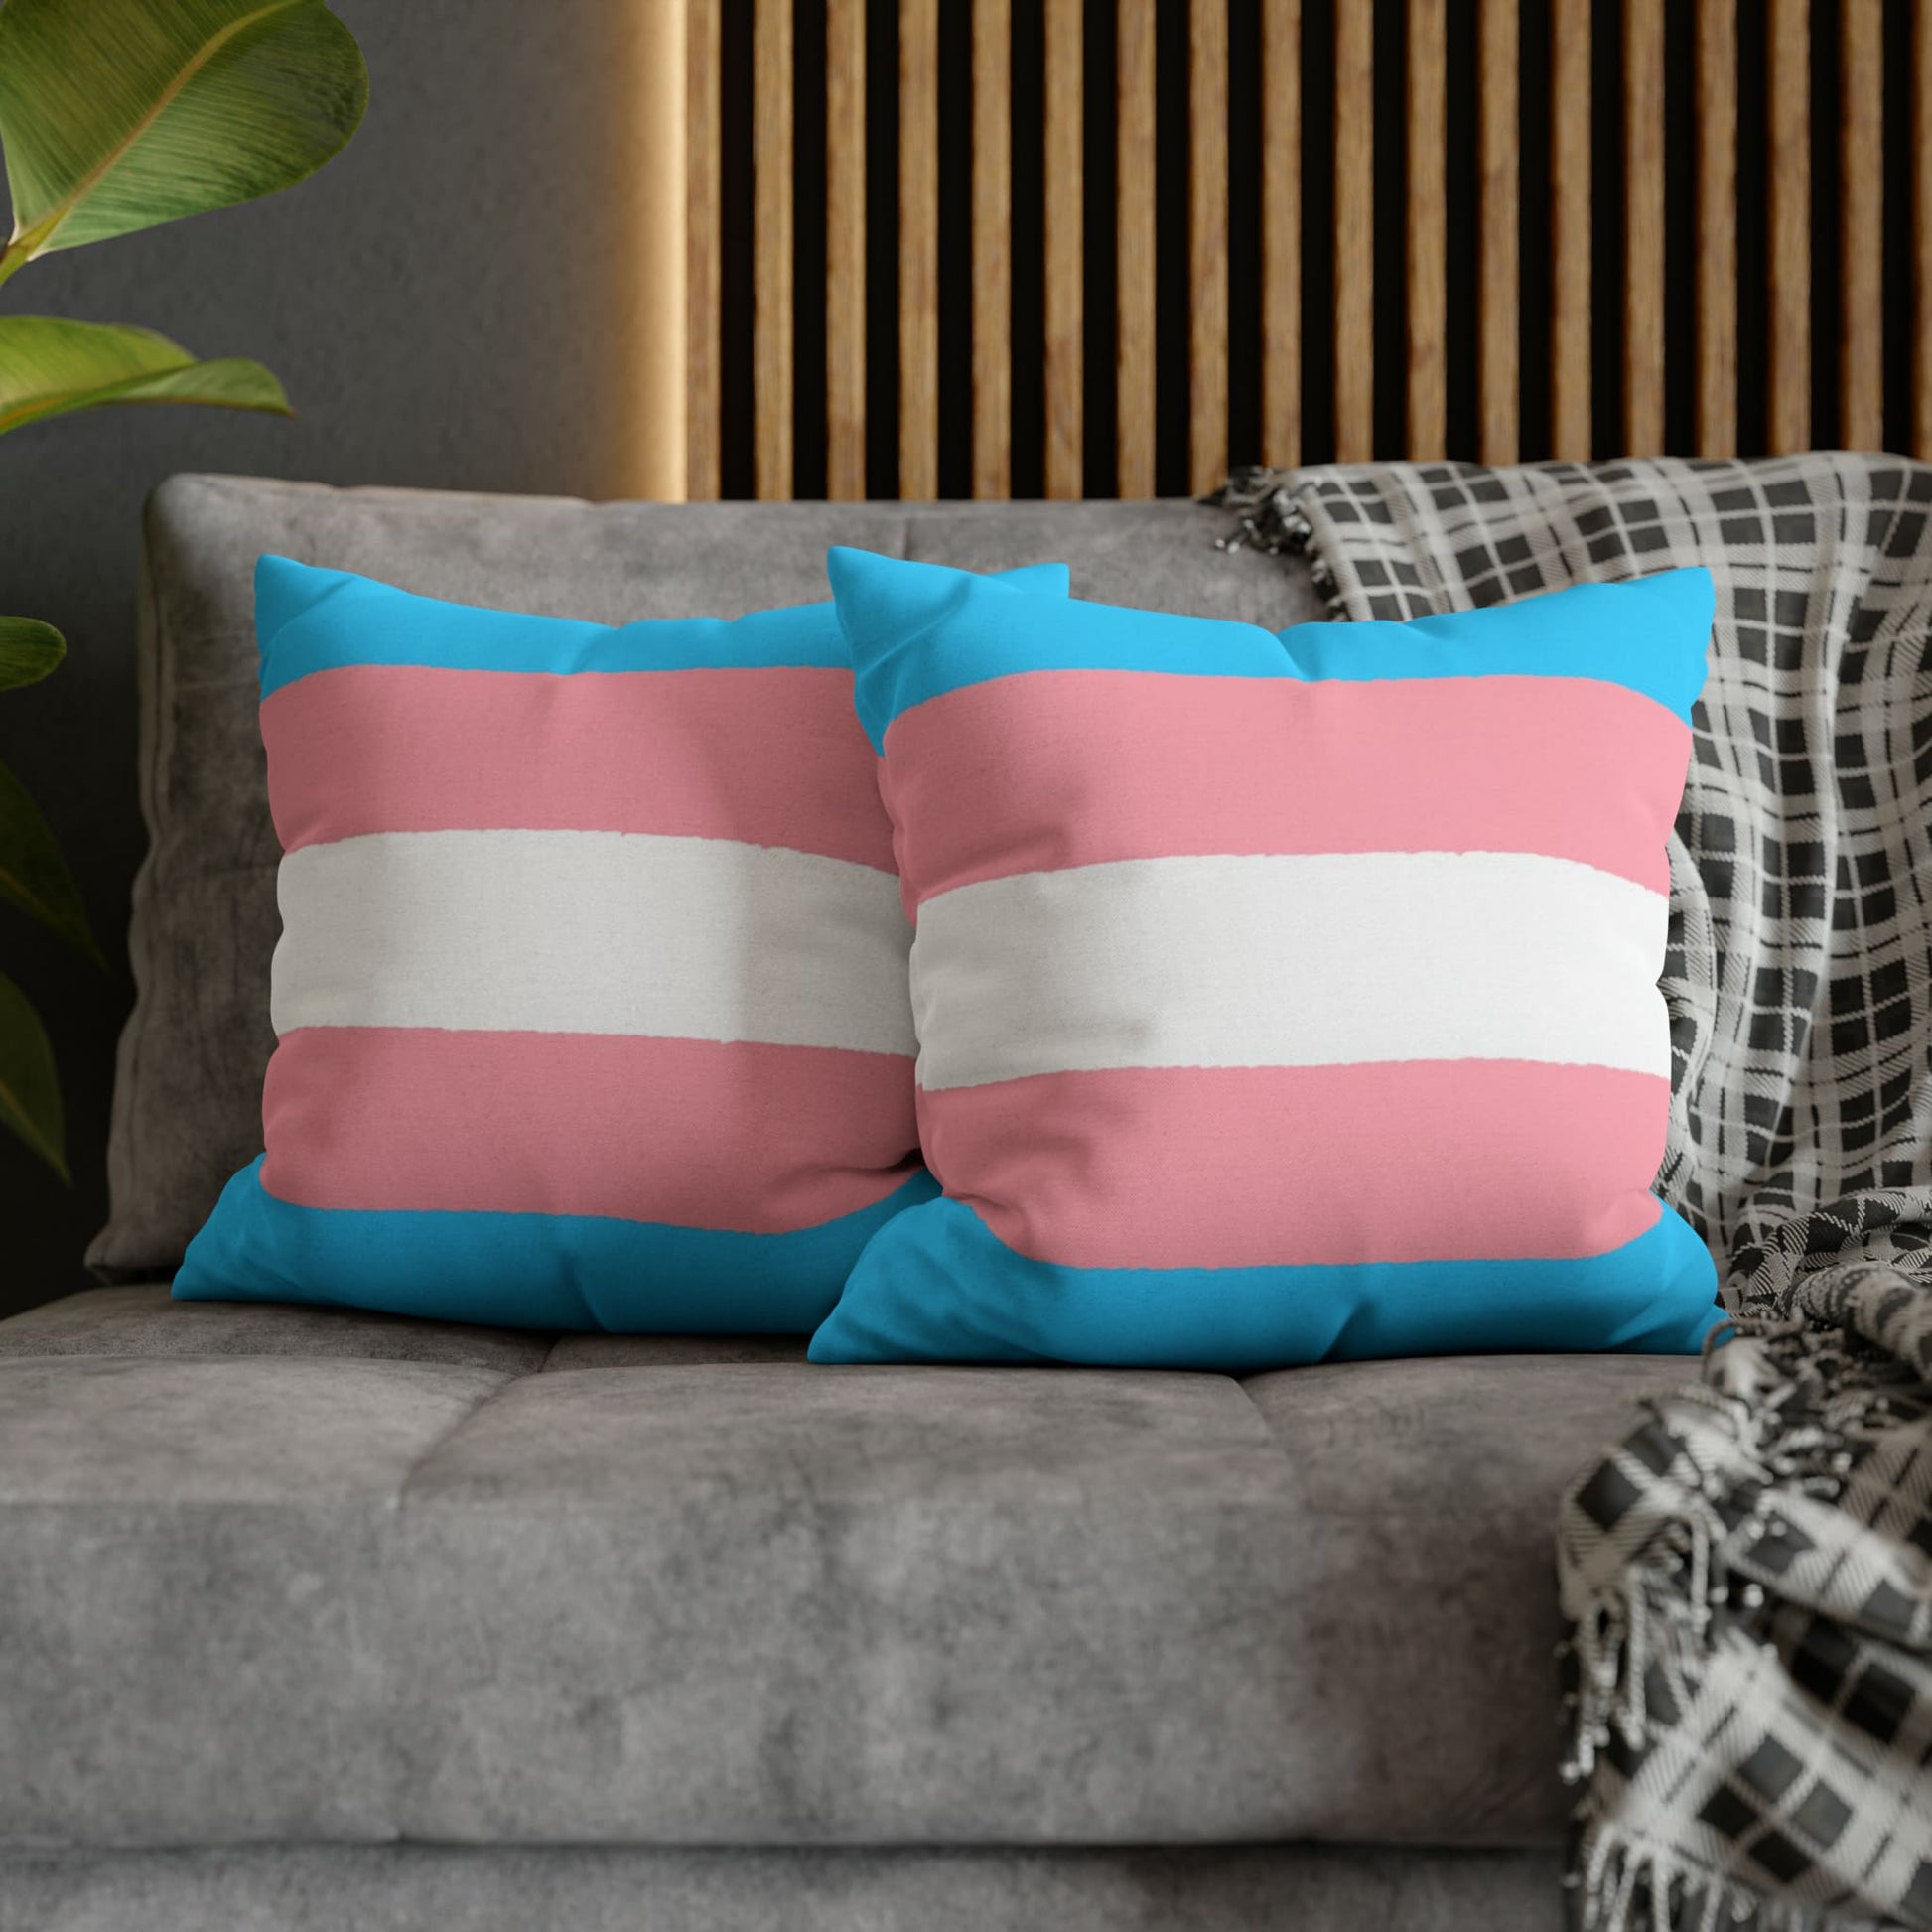 2 transgender pillows on couch